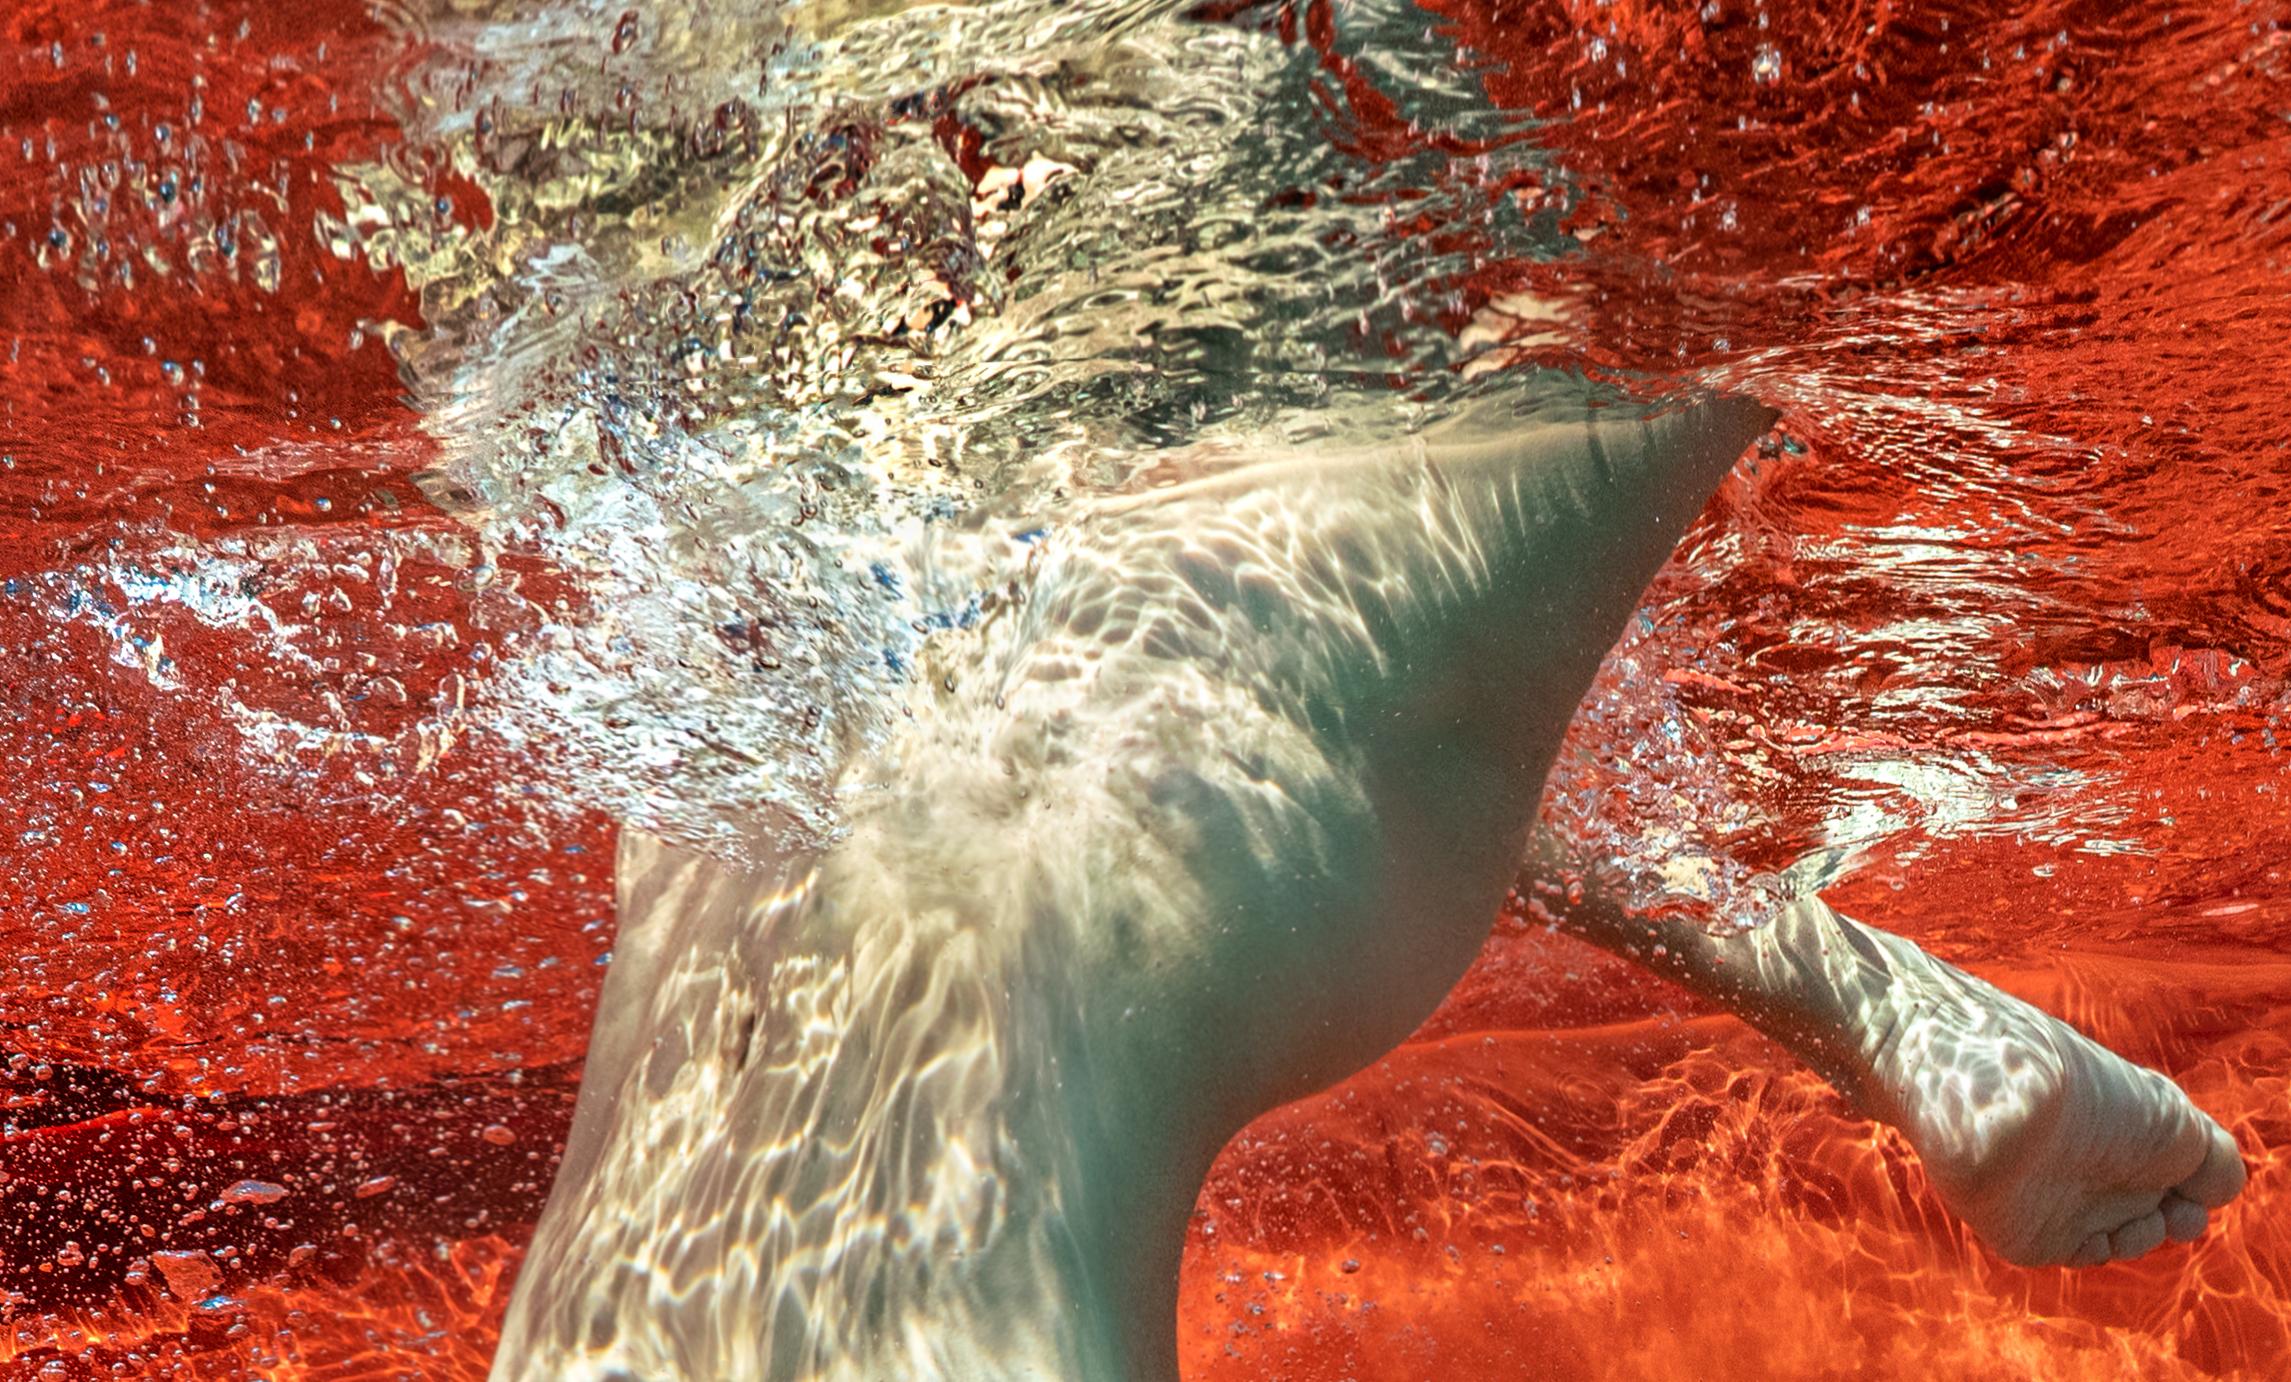 Blood and Milk VIII - underwater nude photograph - archival pigment print 46x35